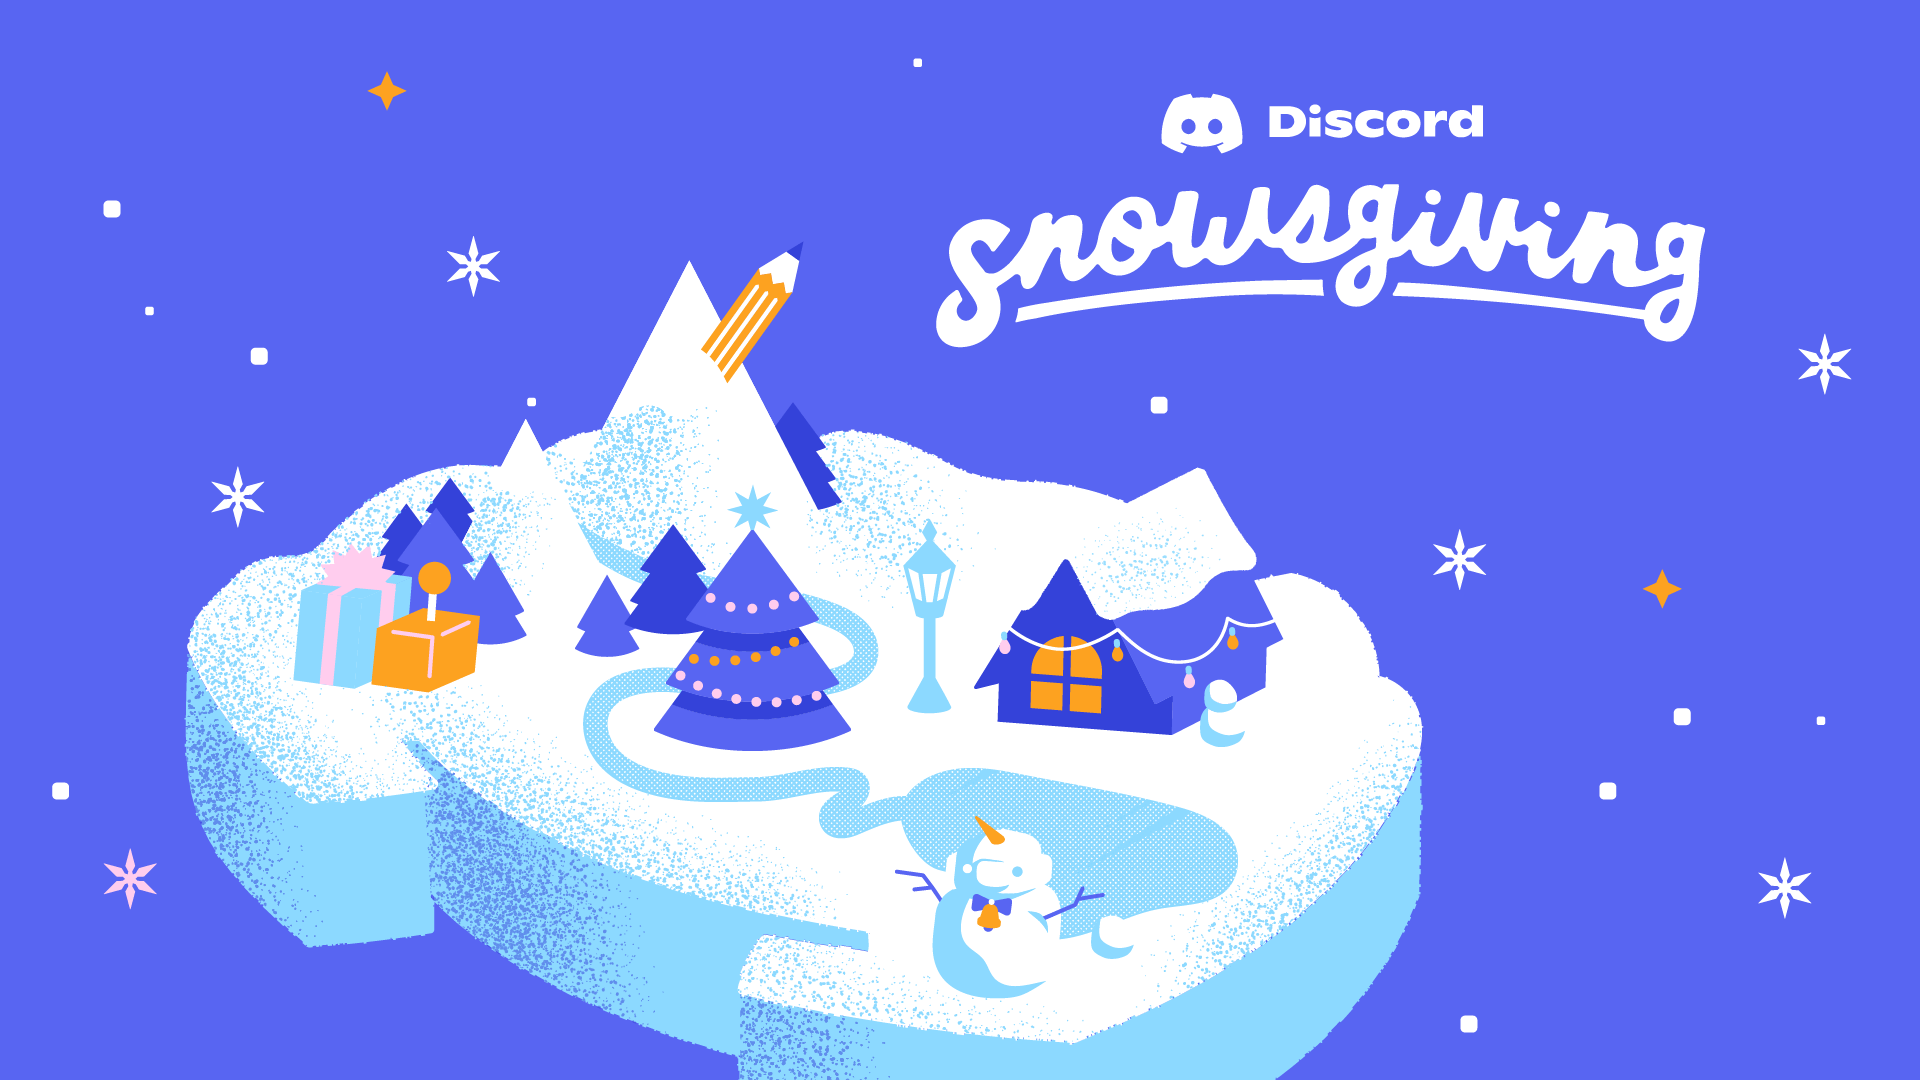 Fed up With Discord's Christmas 'Snowsgiving' Sound Alerts? Here's How